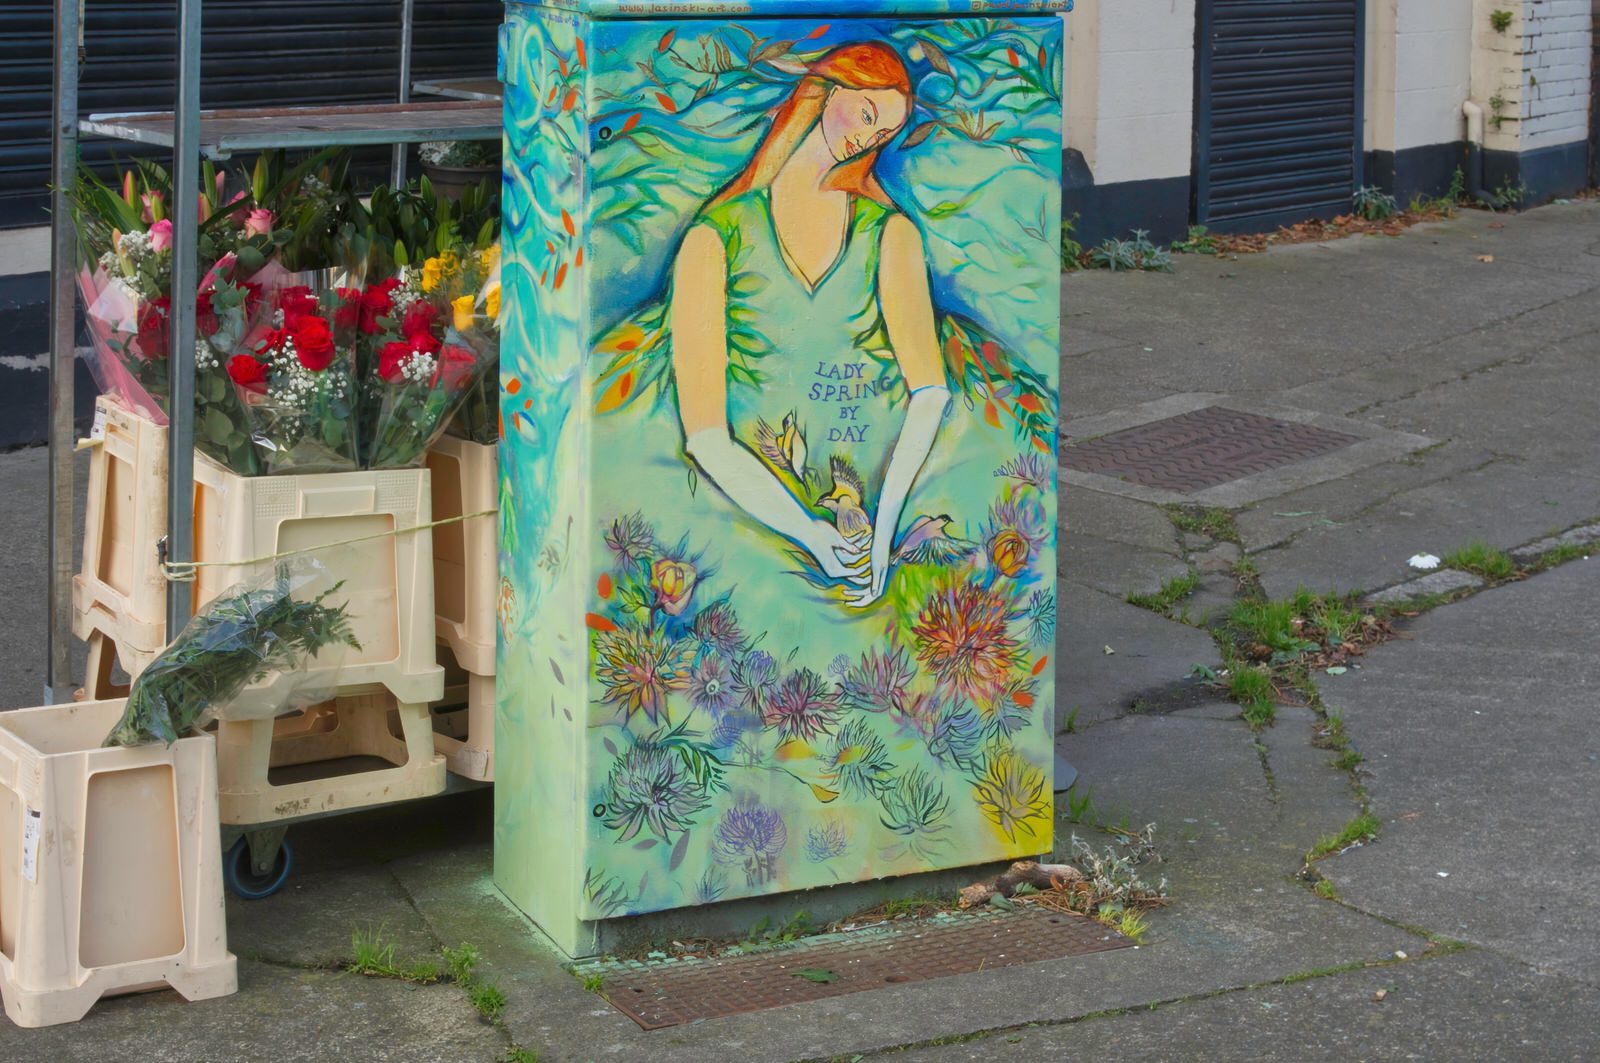 PAINT-A-BOX STREET ART BESIDE THE FLOWER SELLER AT THE GATES OF MOUNT JEROME CEMETERY 001